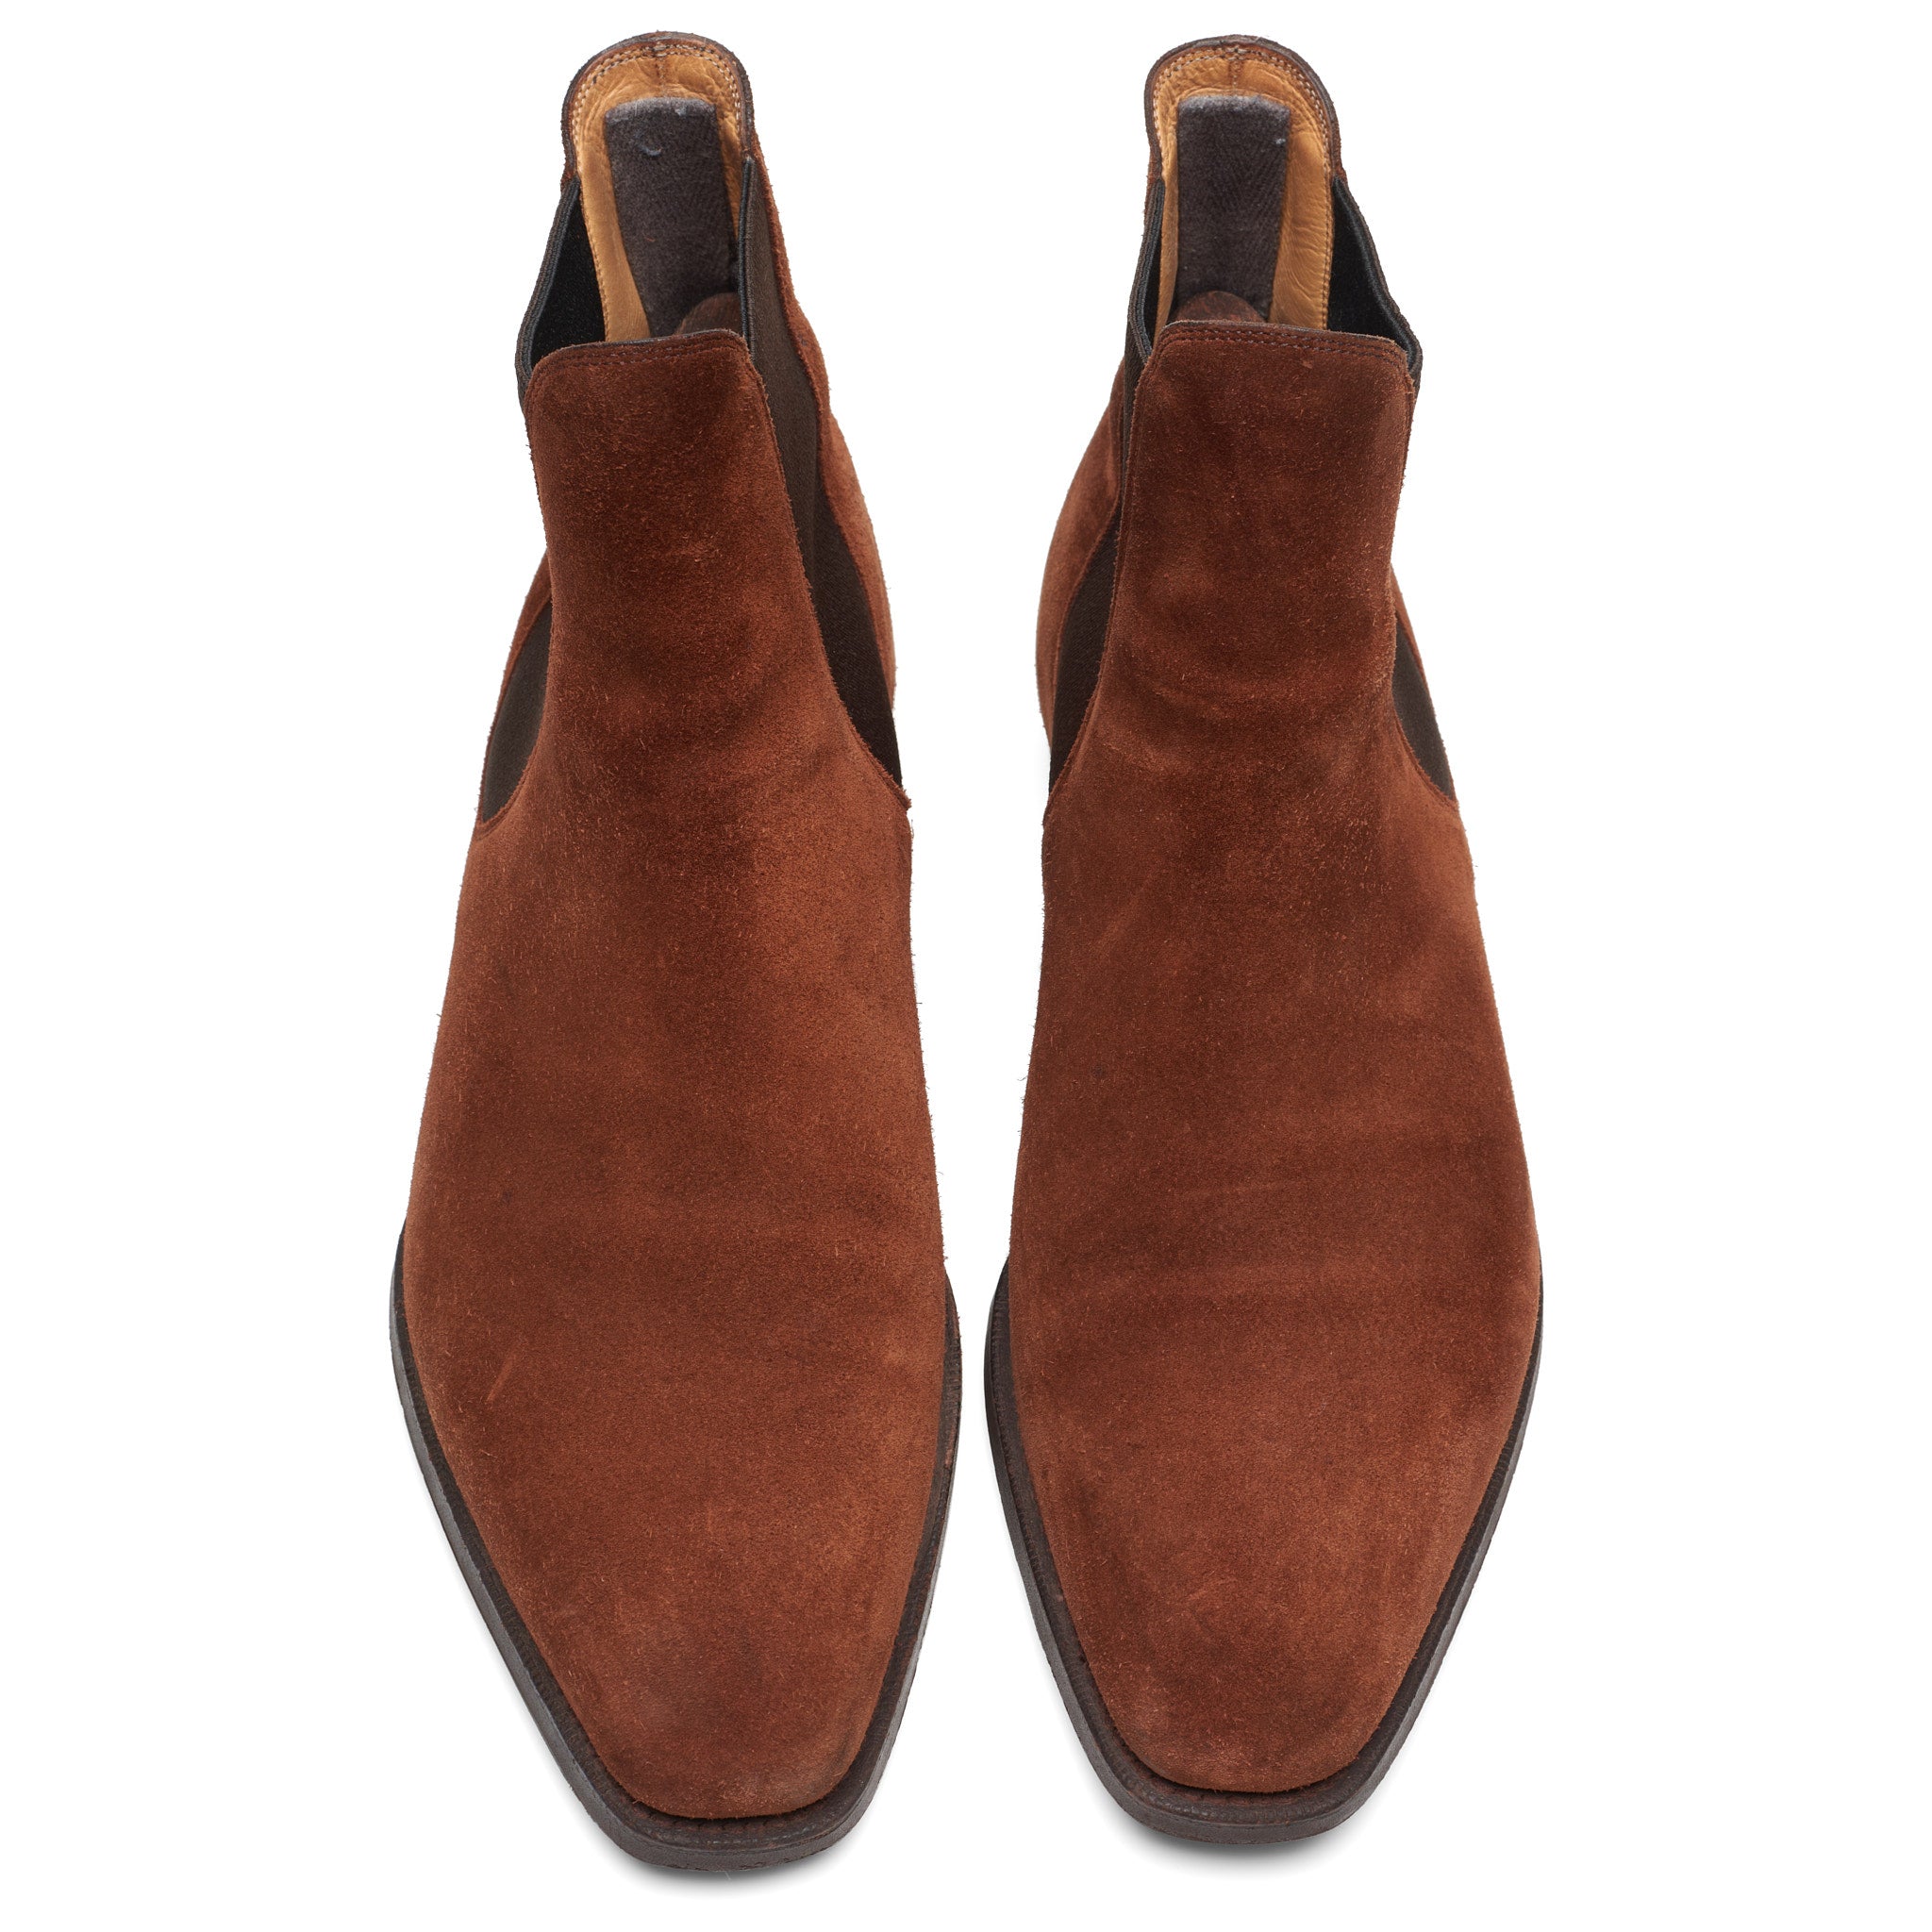 GAZIANO & GIRLING "Burnham" Polo Suede Leather Chelsea Boots UK 8E US 8.5 Last MH71 GAZIANO & GIRLING